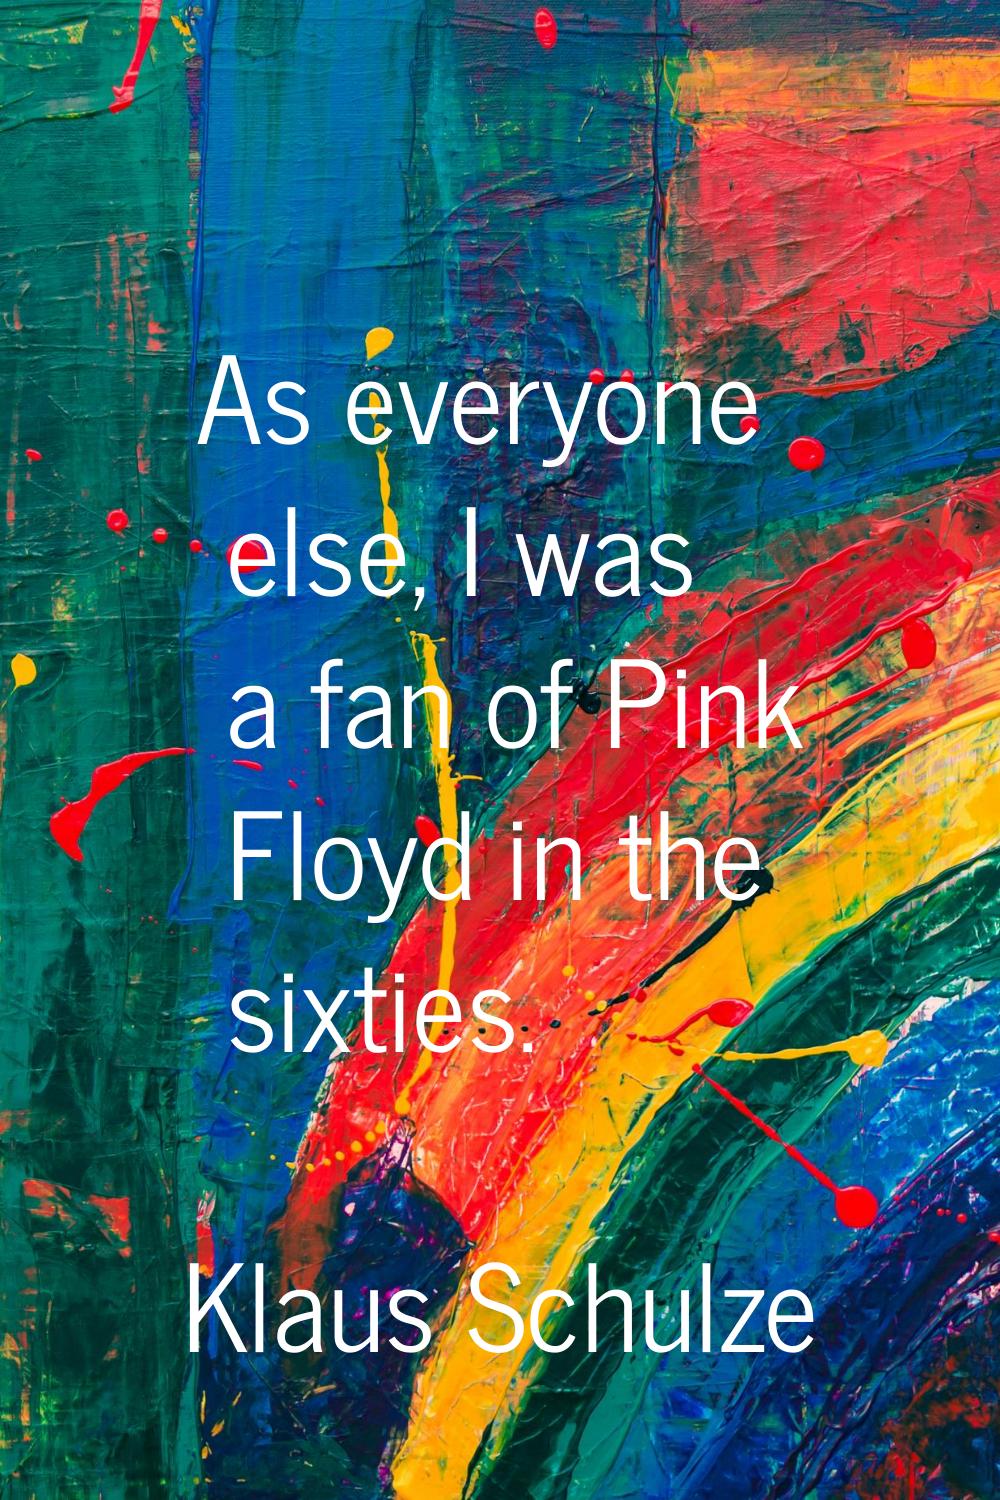 As everyone else, I was a fan of Pink Floyd in the sixties.